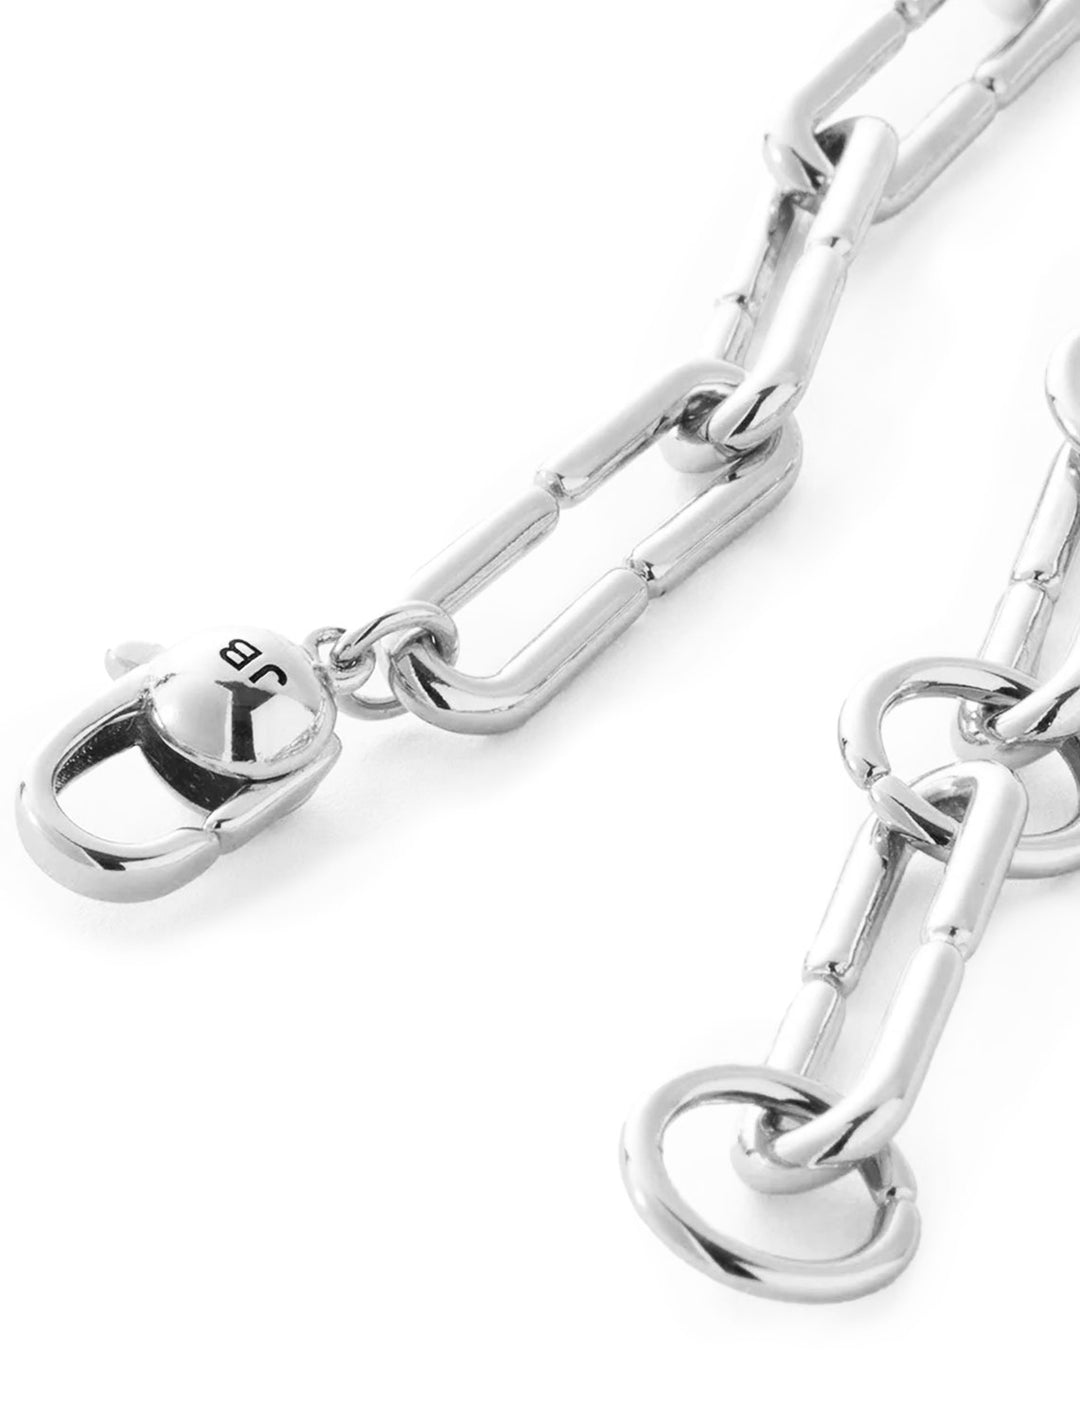 Close-up view of Jenny Bird's ballon link chain in silver.